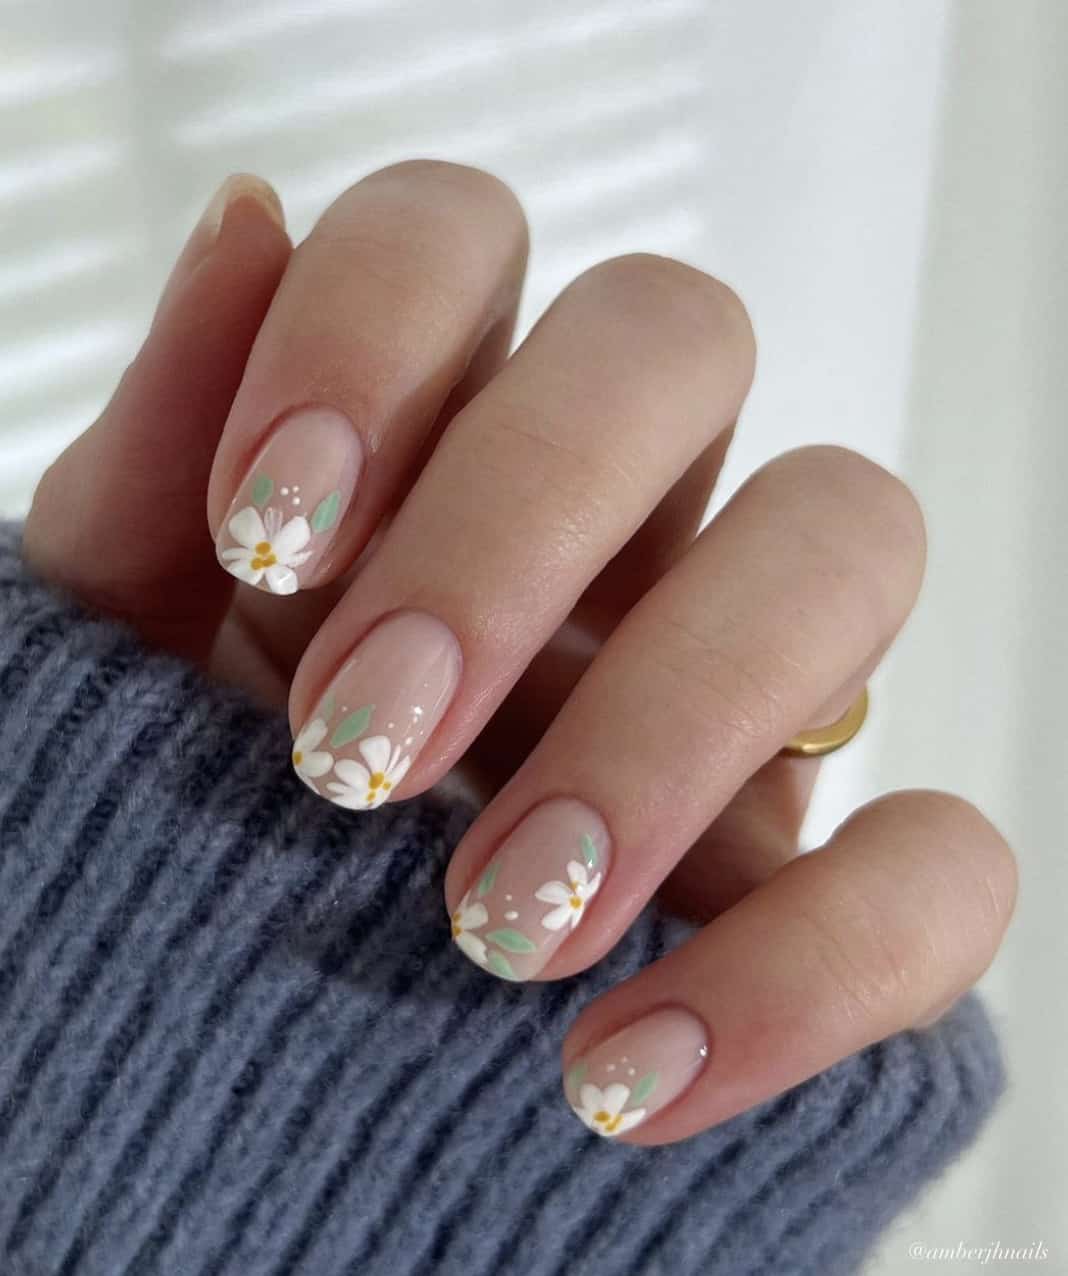 A hand with short nude nails painted with white flowers and green leaves along the tips